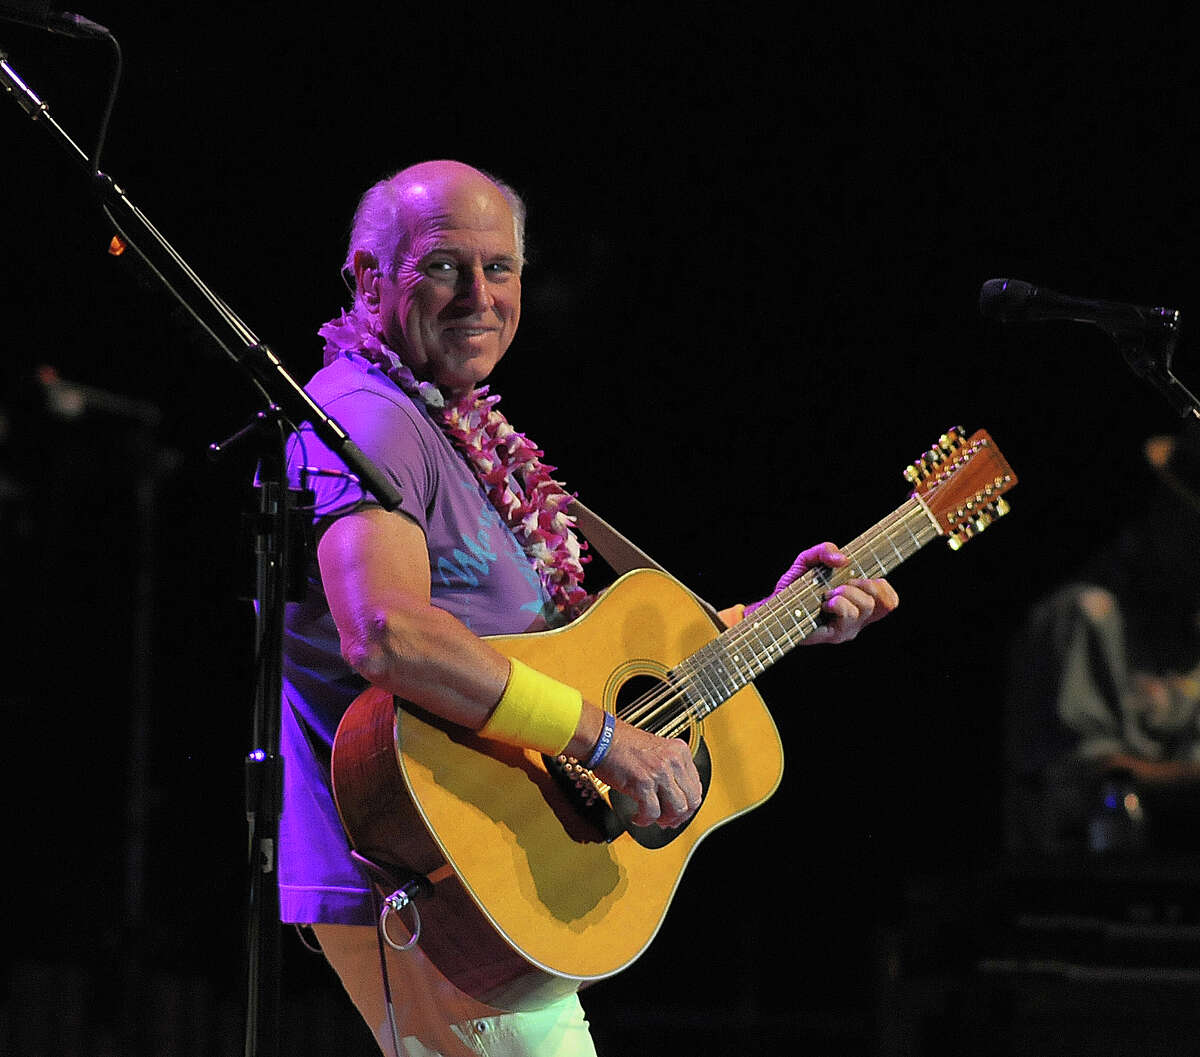 Jimmy Buffett performs at Cynthia Woods Mitchell Pavilion in The Woodlands Thursday May 29, 2014.